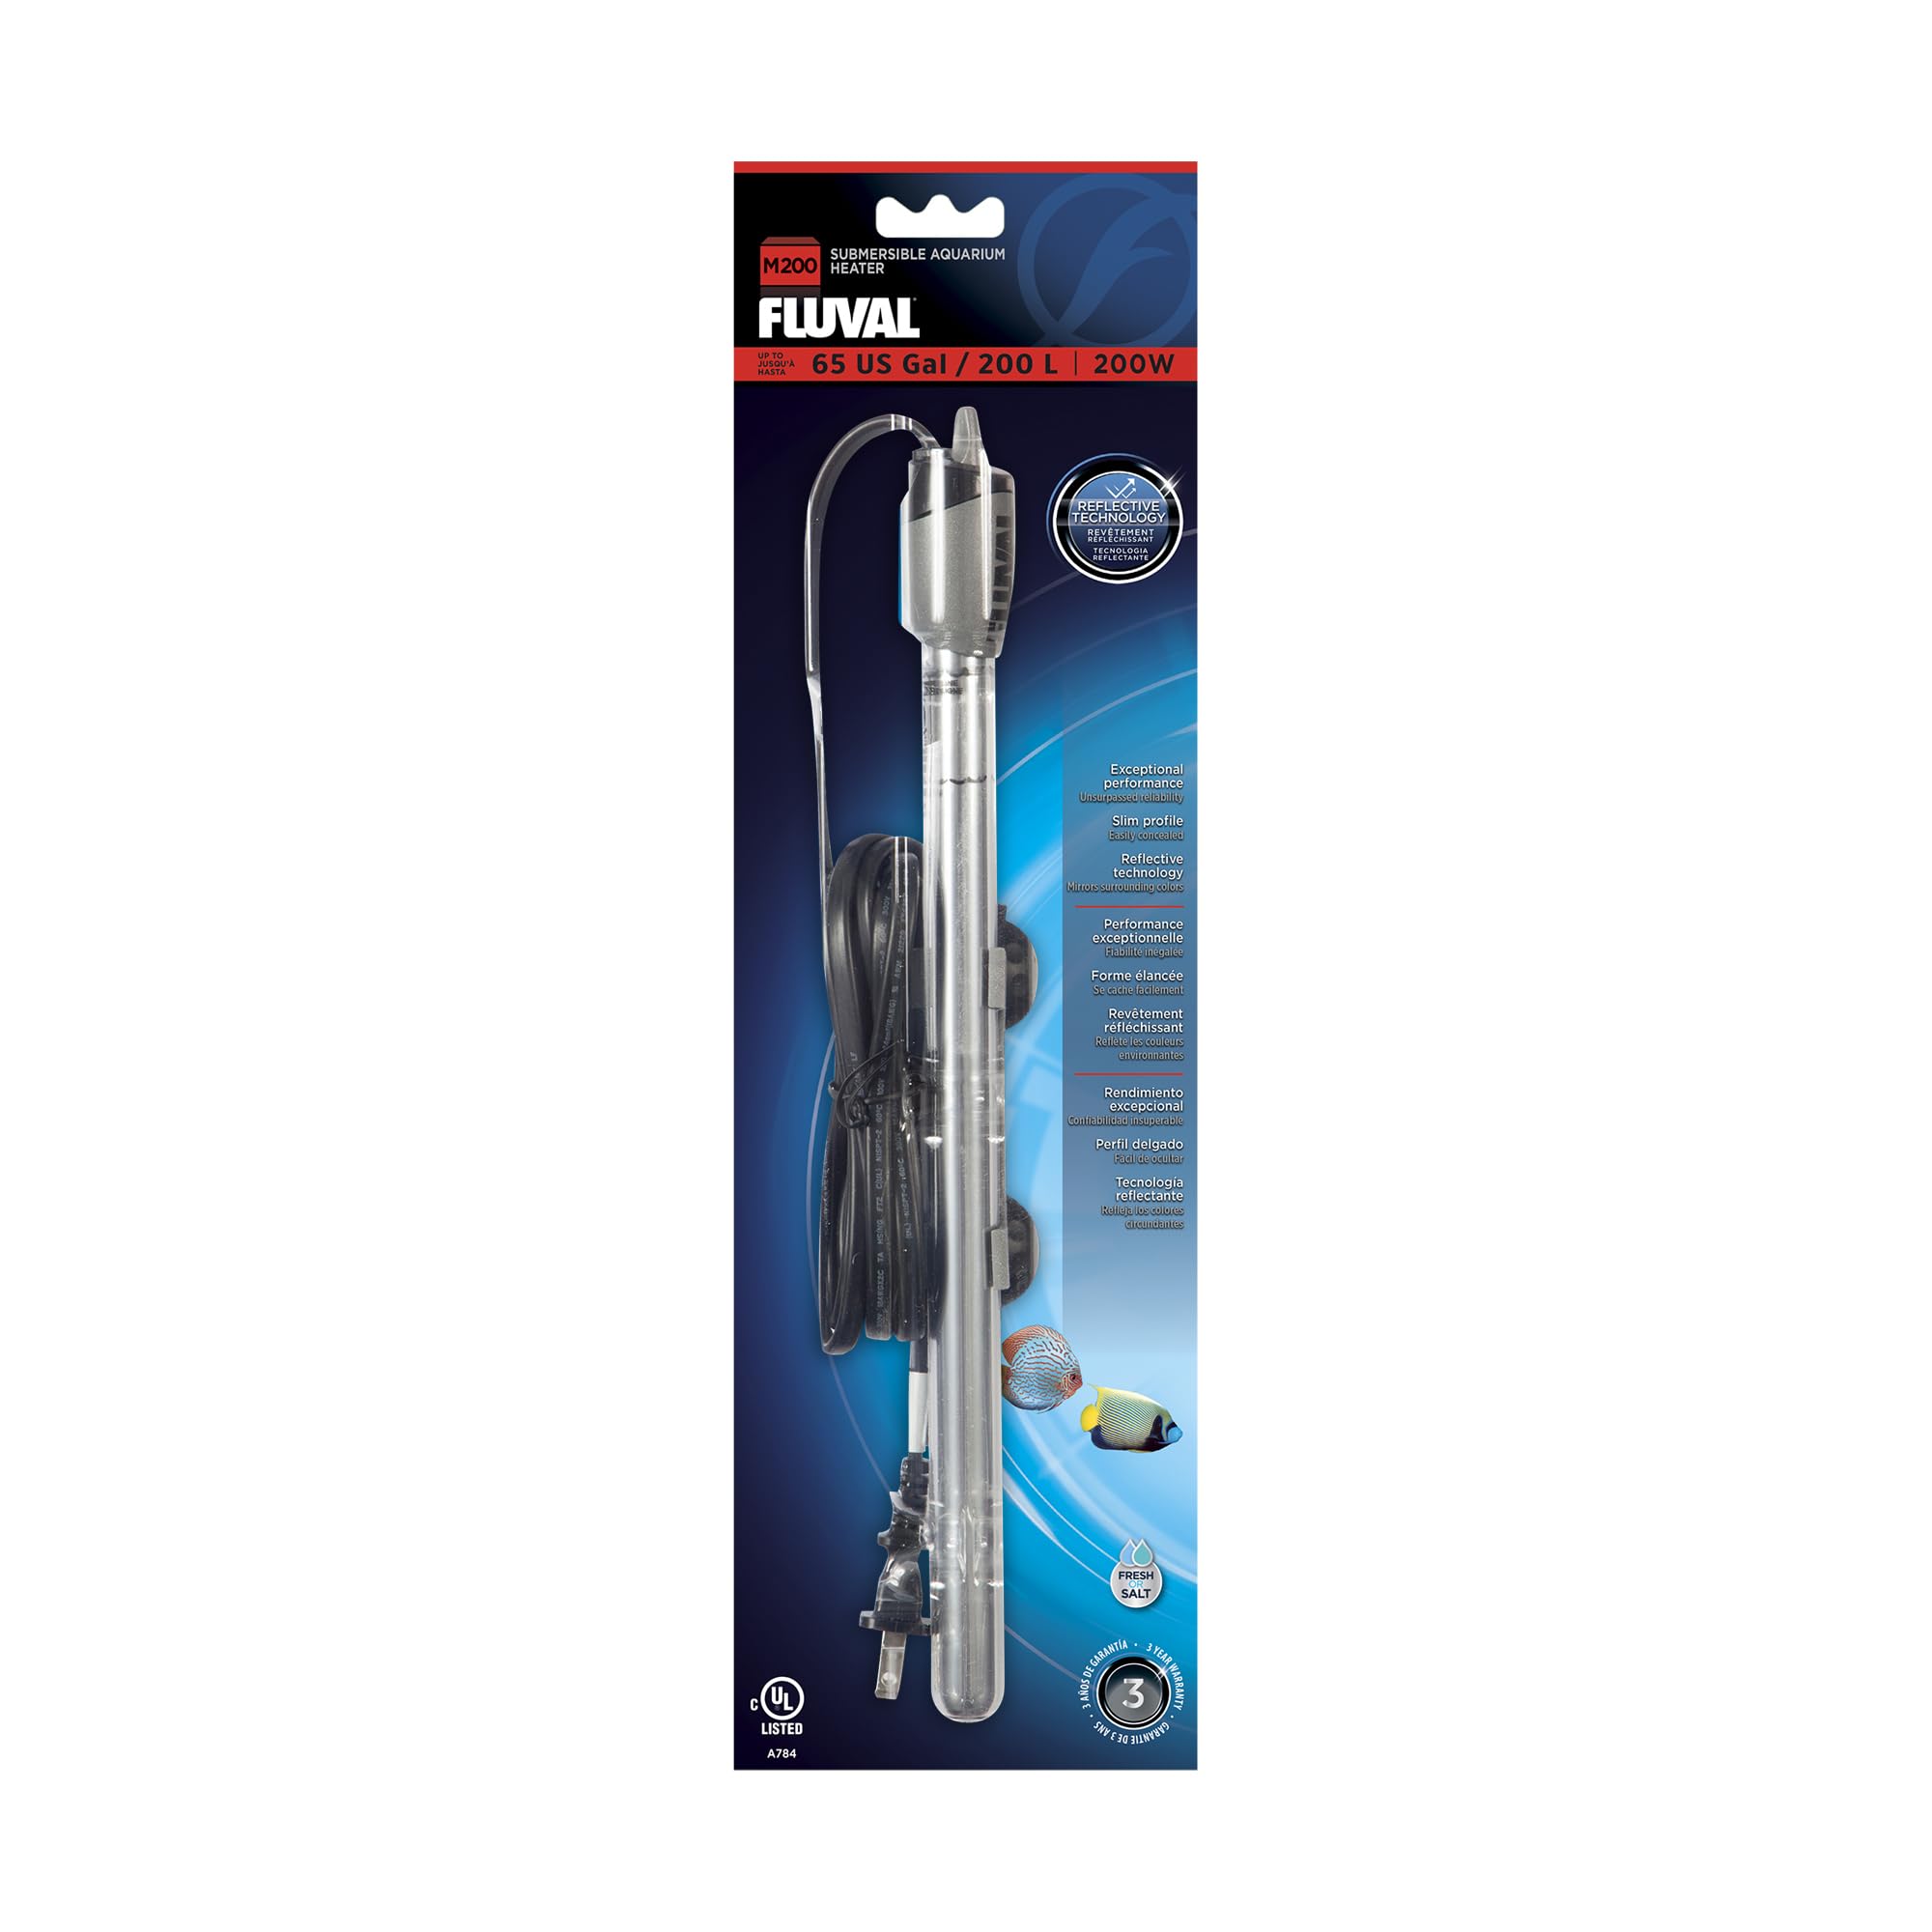 Fluval’s 200W Submersible Heater